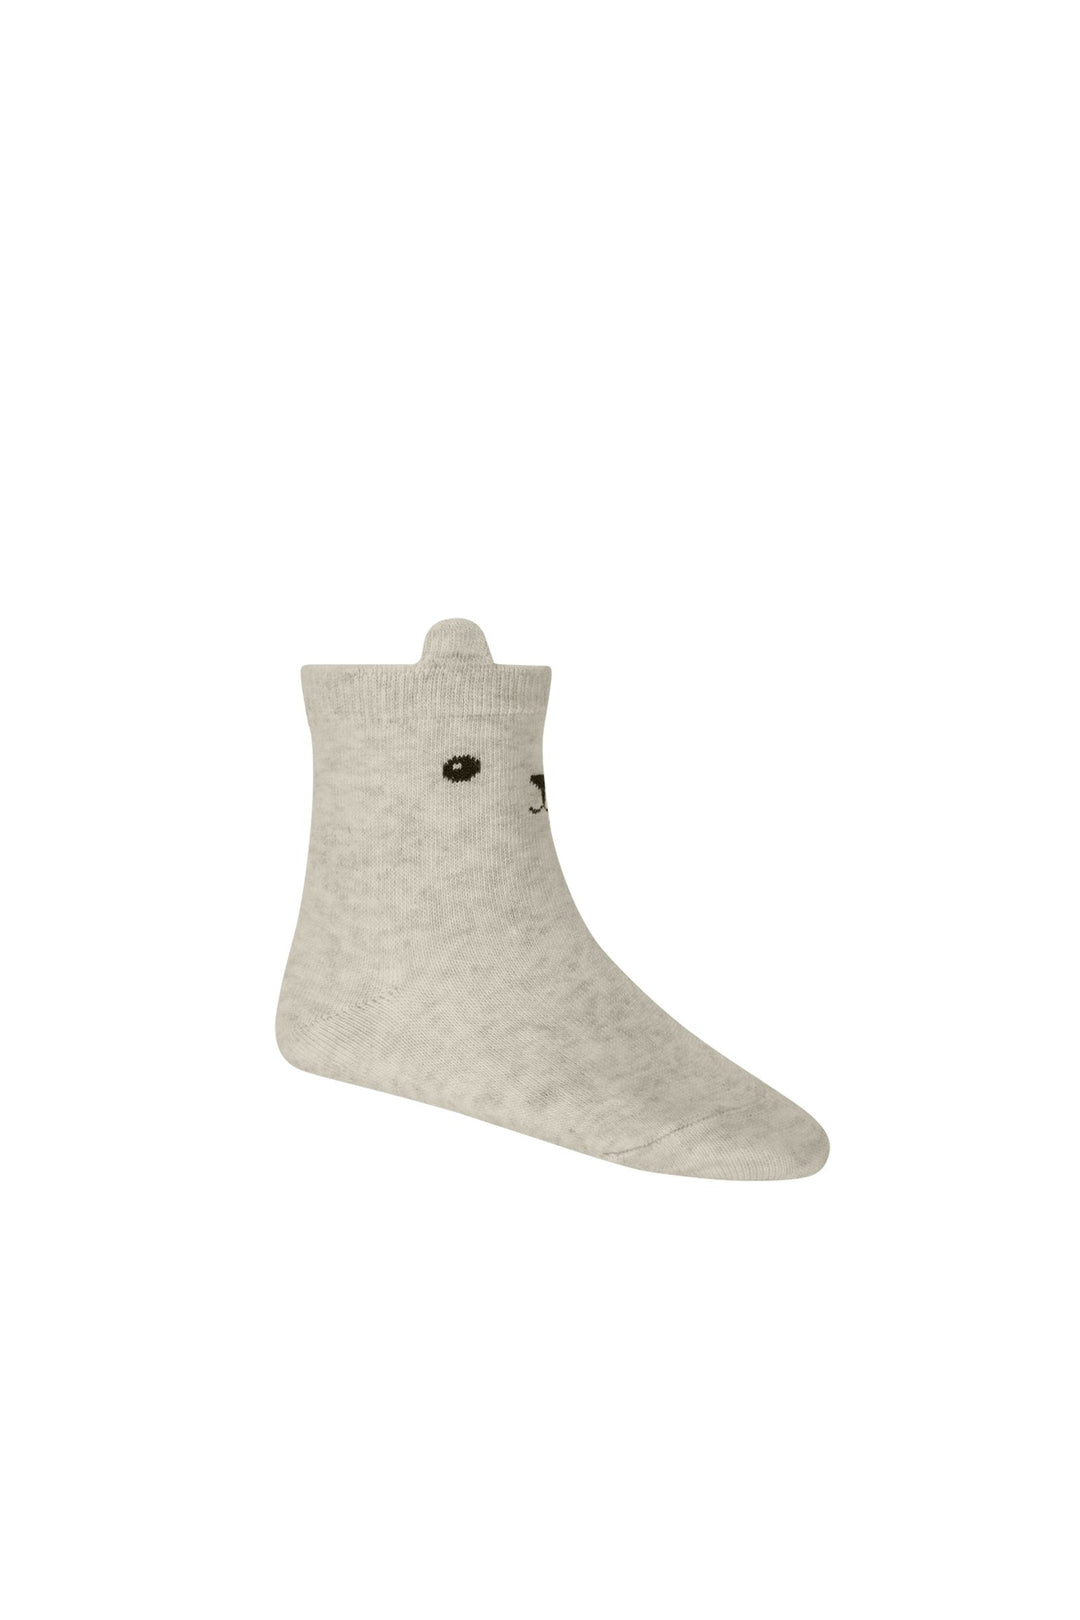 George bear ankle sock - oatmeal marle - JL & CO. boutique 